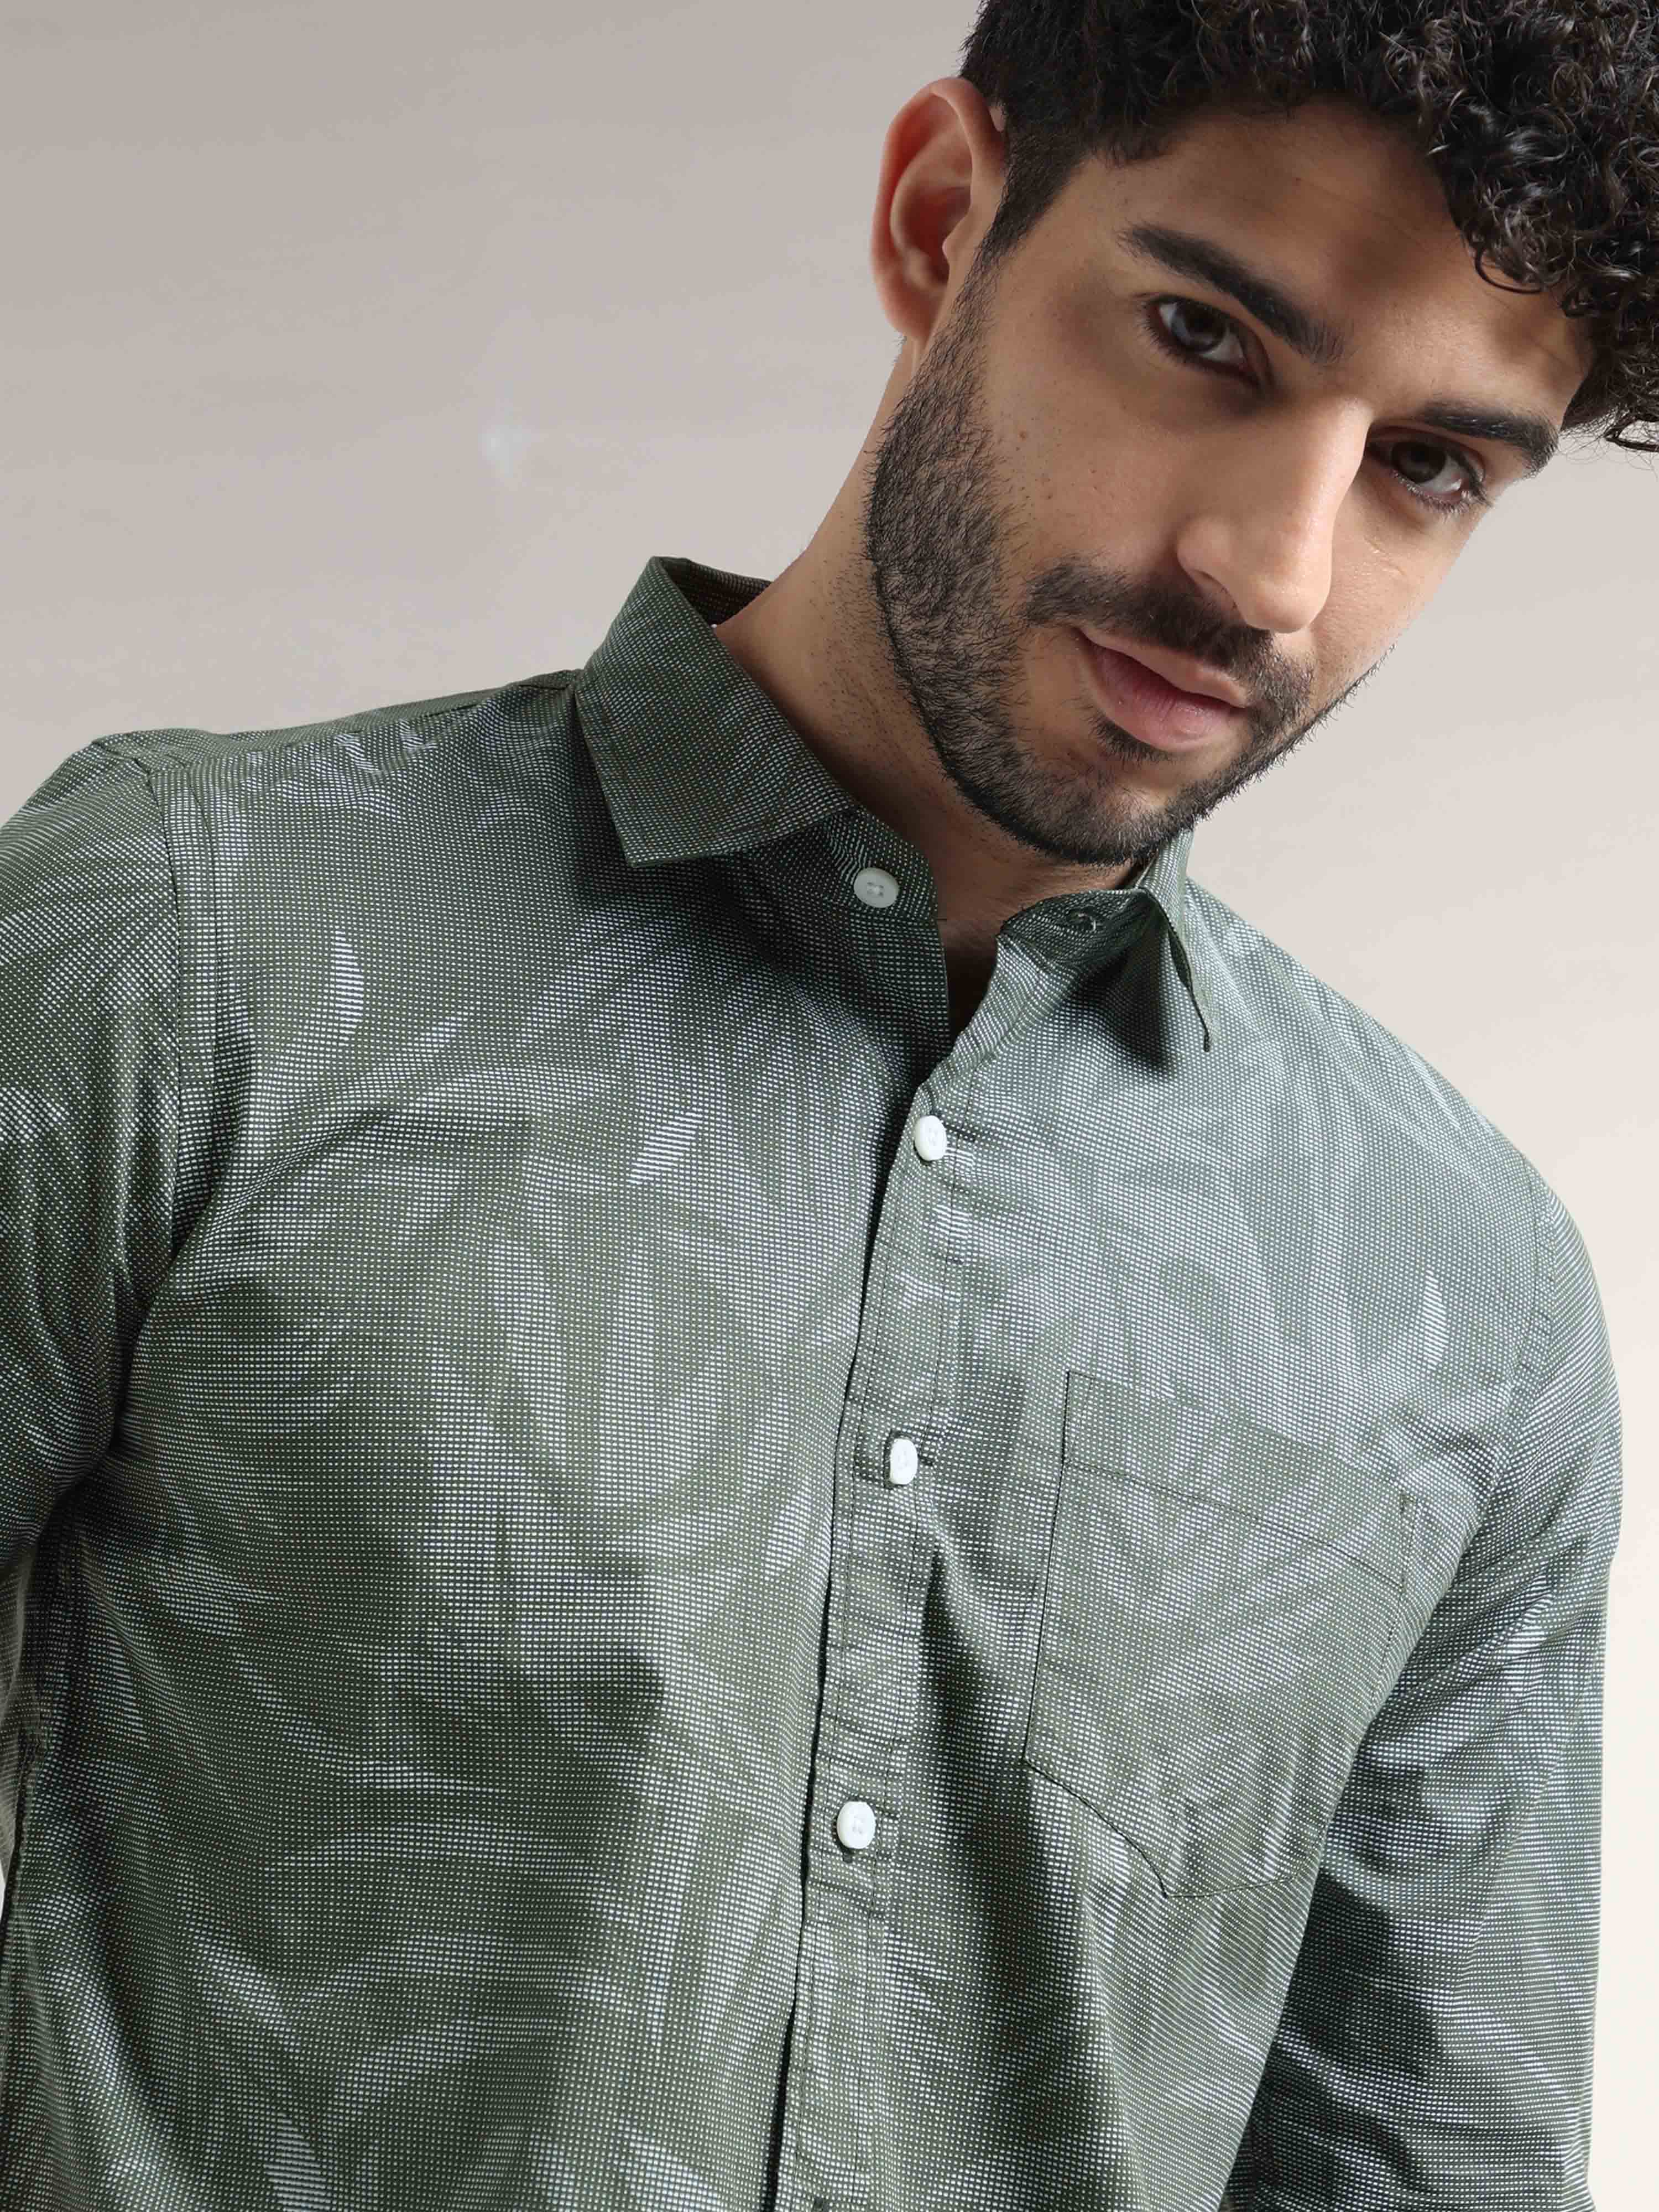 Shop Cool And Comfortable Floral Print Shirt Mens OnlineRs. 1199.00